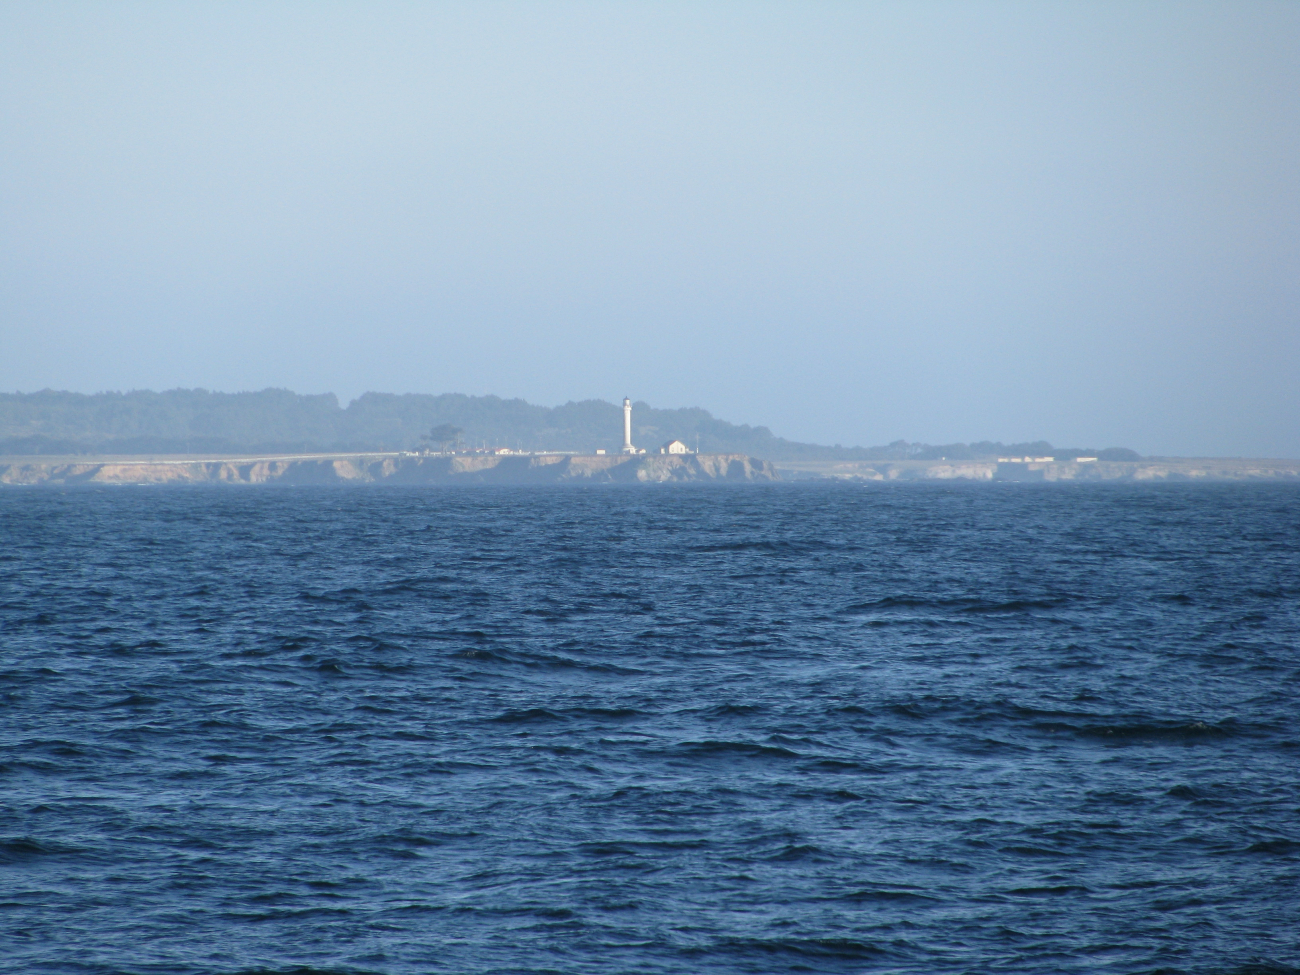 Point Arena Lighthouse seen from offshore